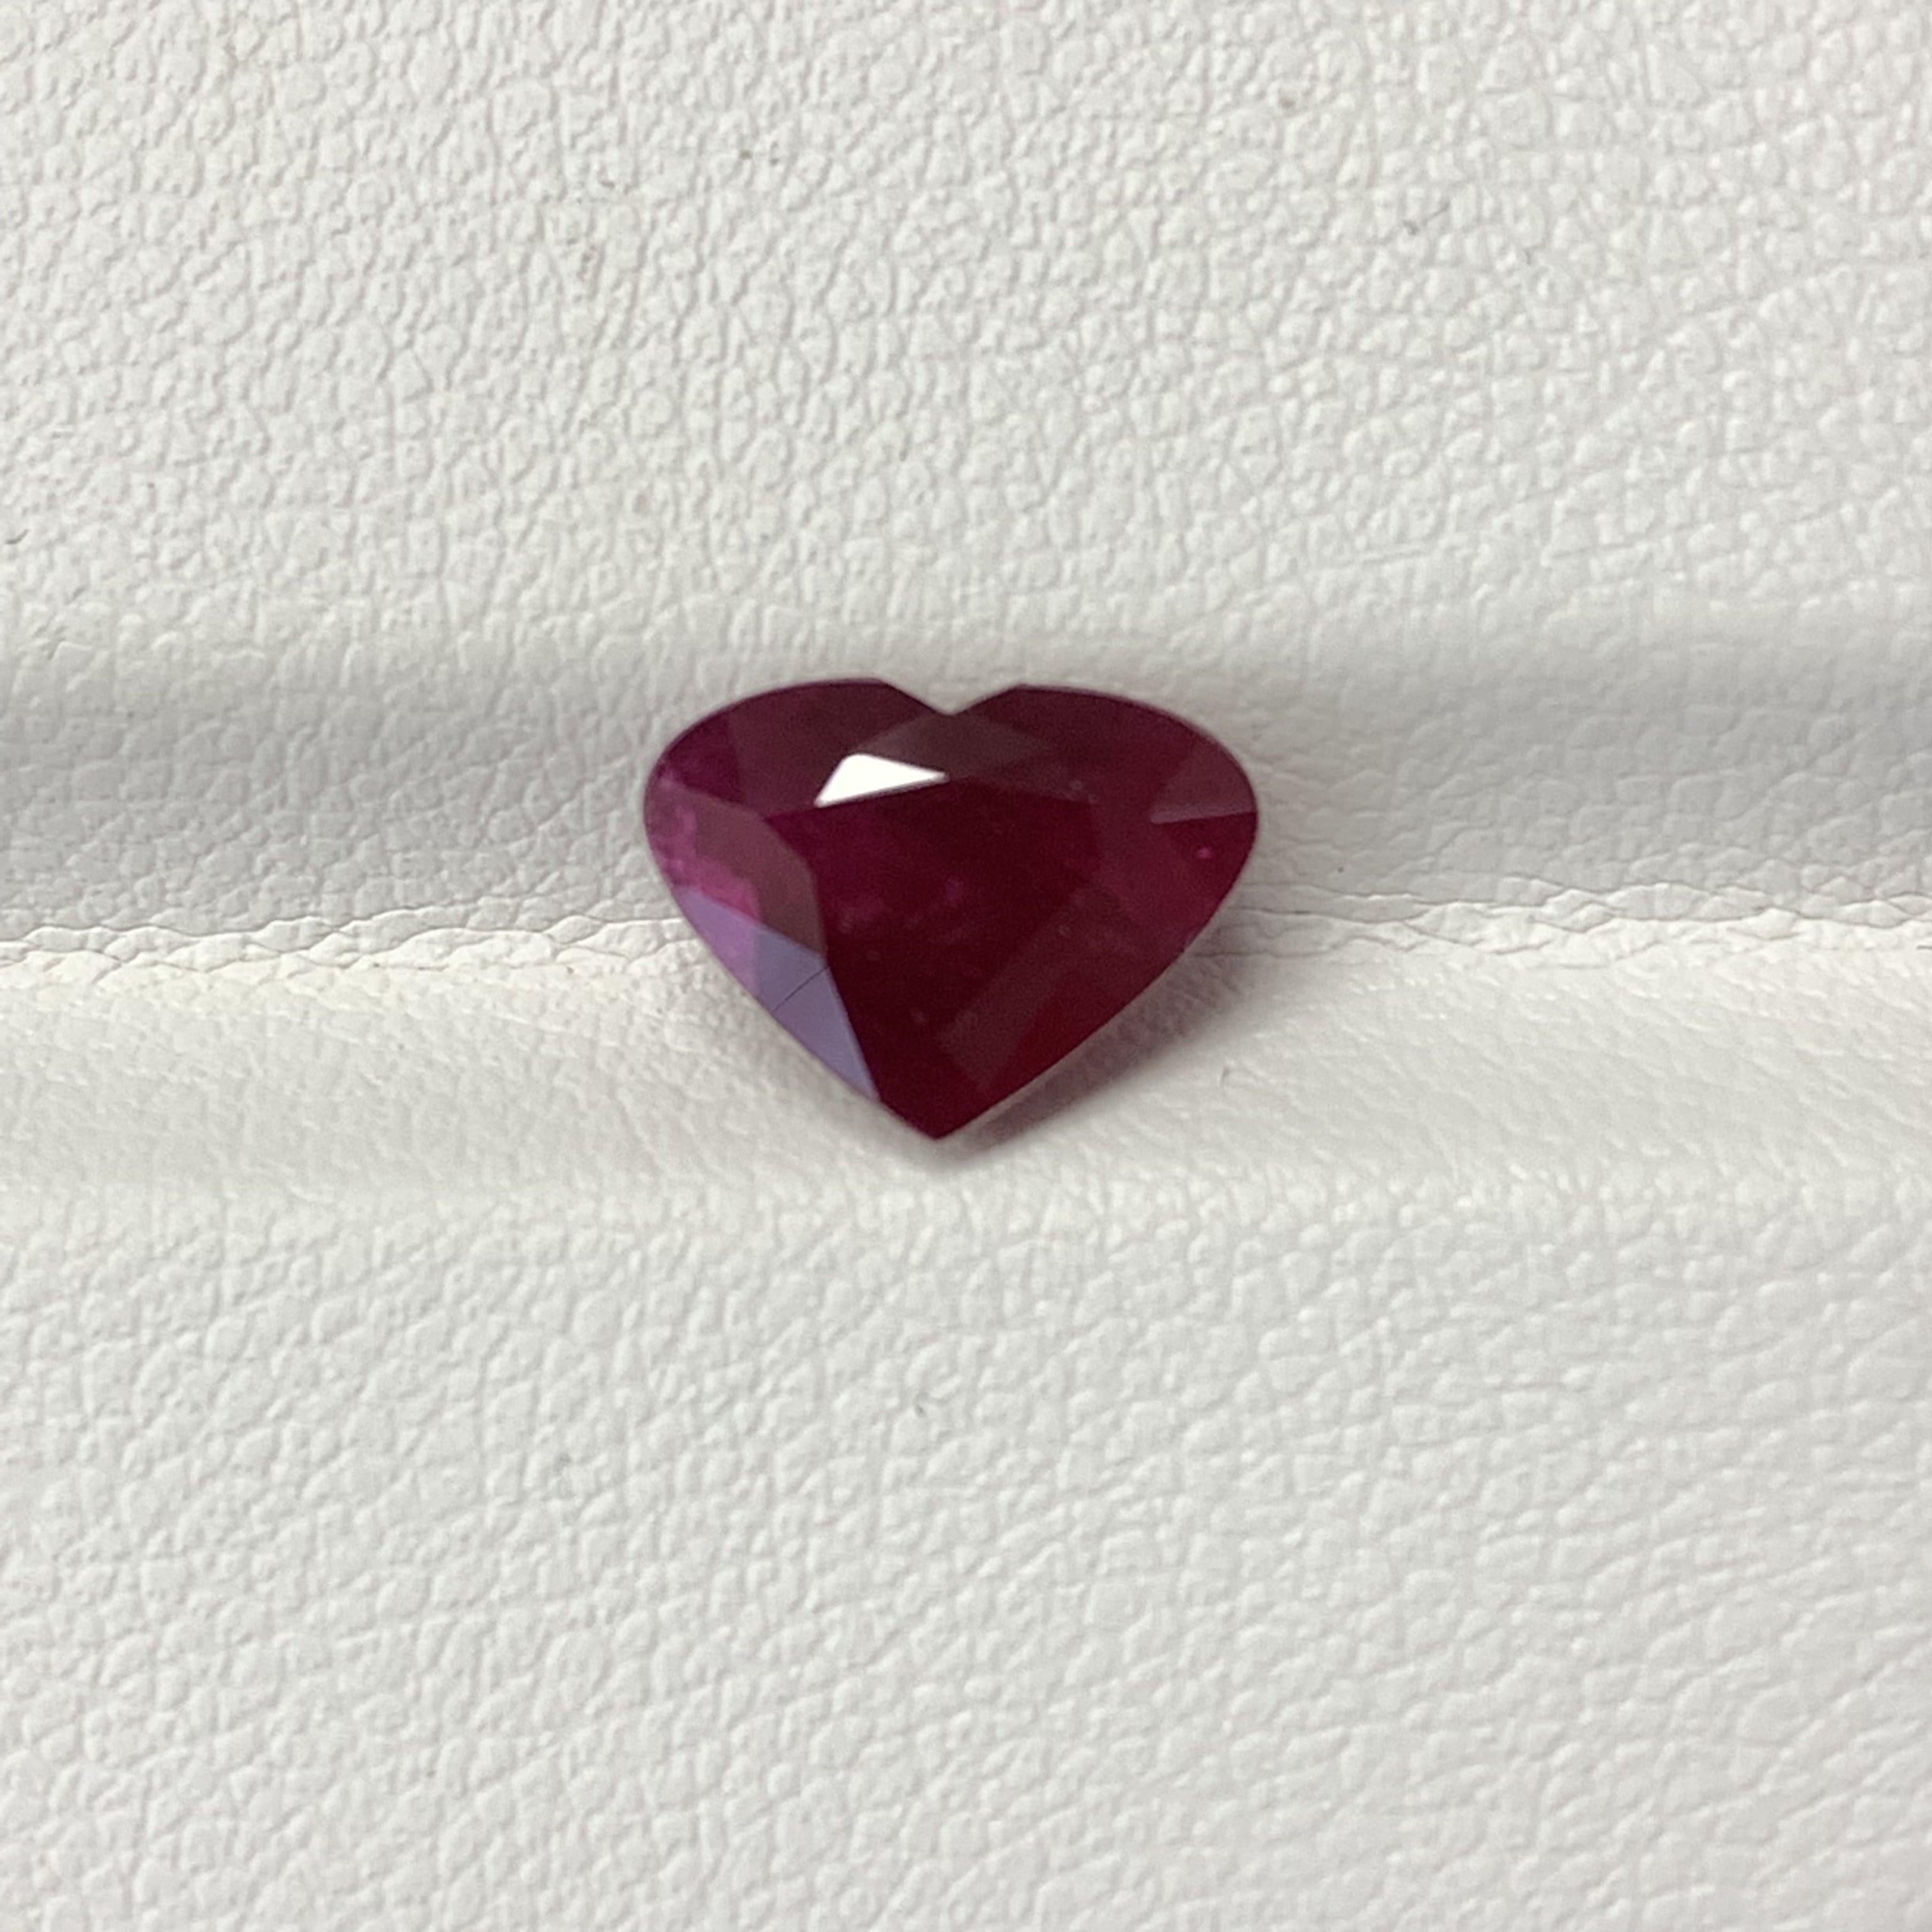 2.47 Carat Heart Shaped Natural Ruby Valentine's Day Special 2